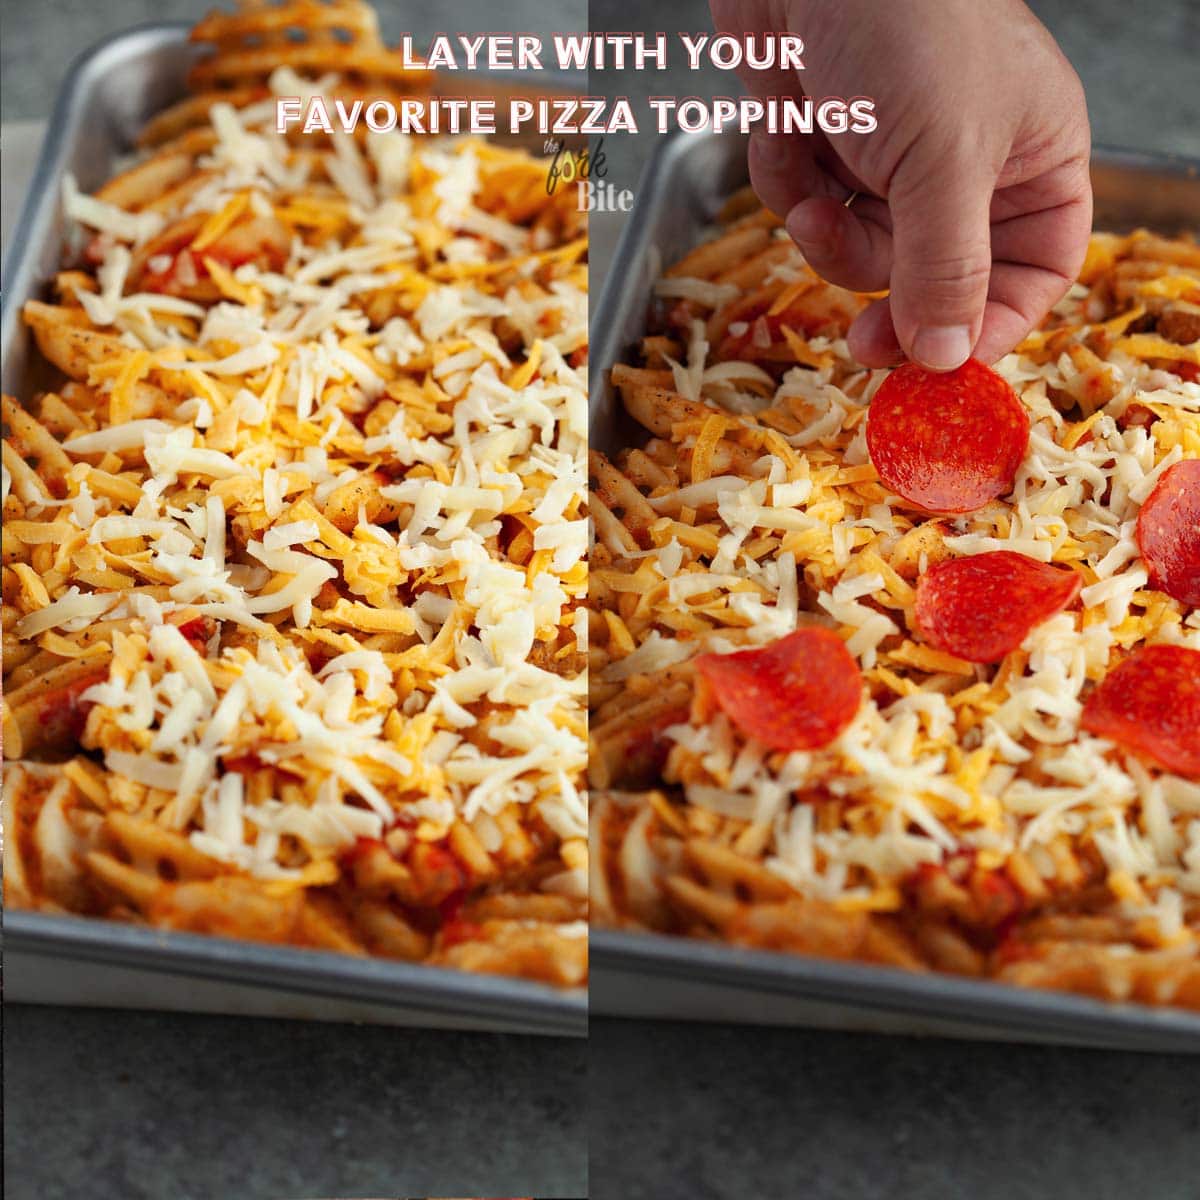 We all know that pizza fries are so easy to make on your own. I will guide you through each step so that you can achieve the same results I get each time I make a batch